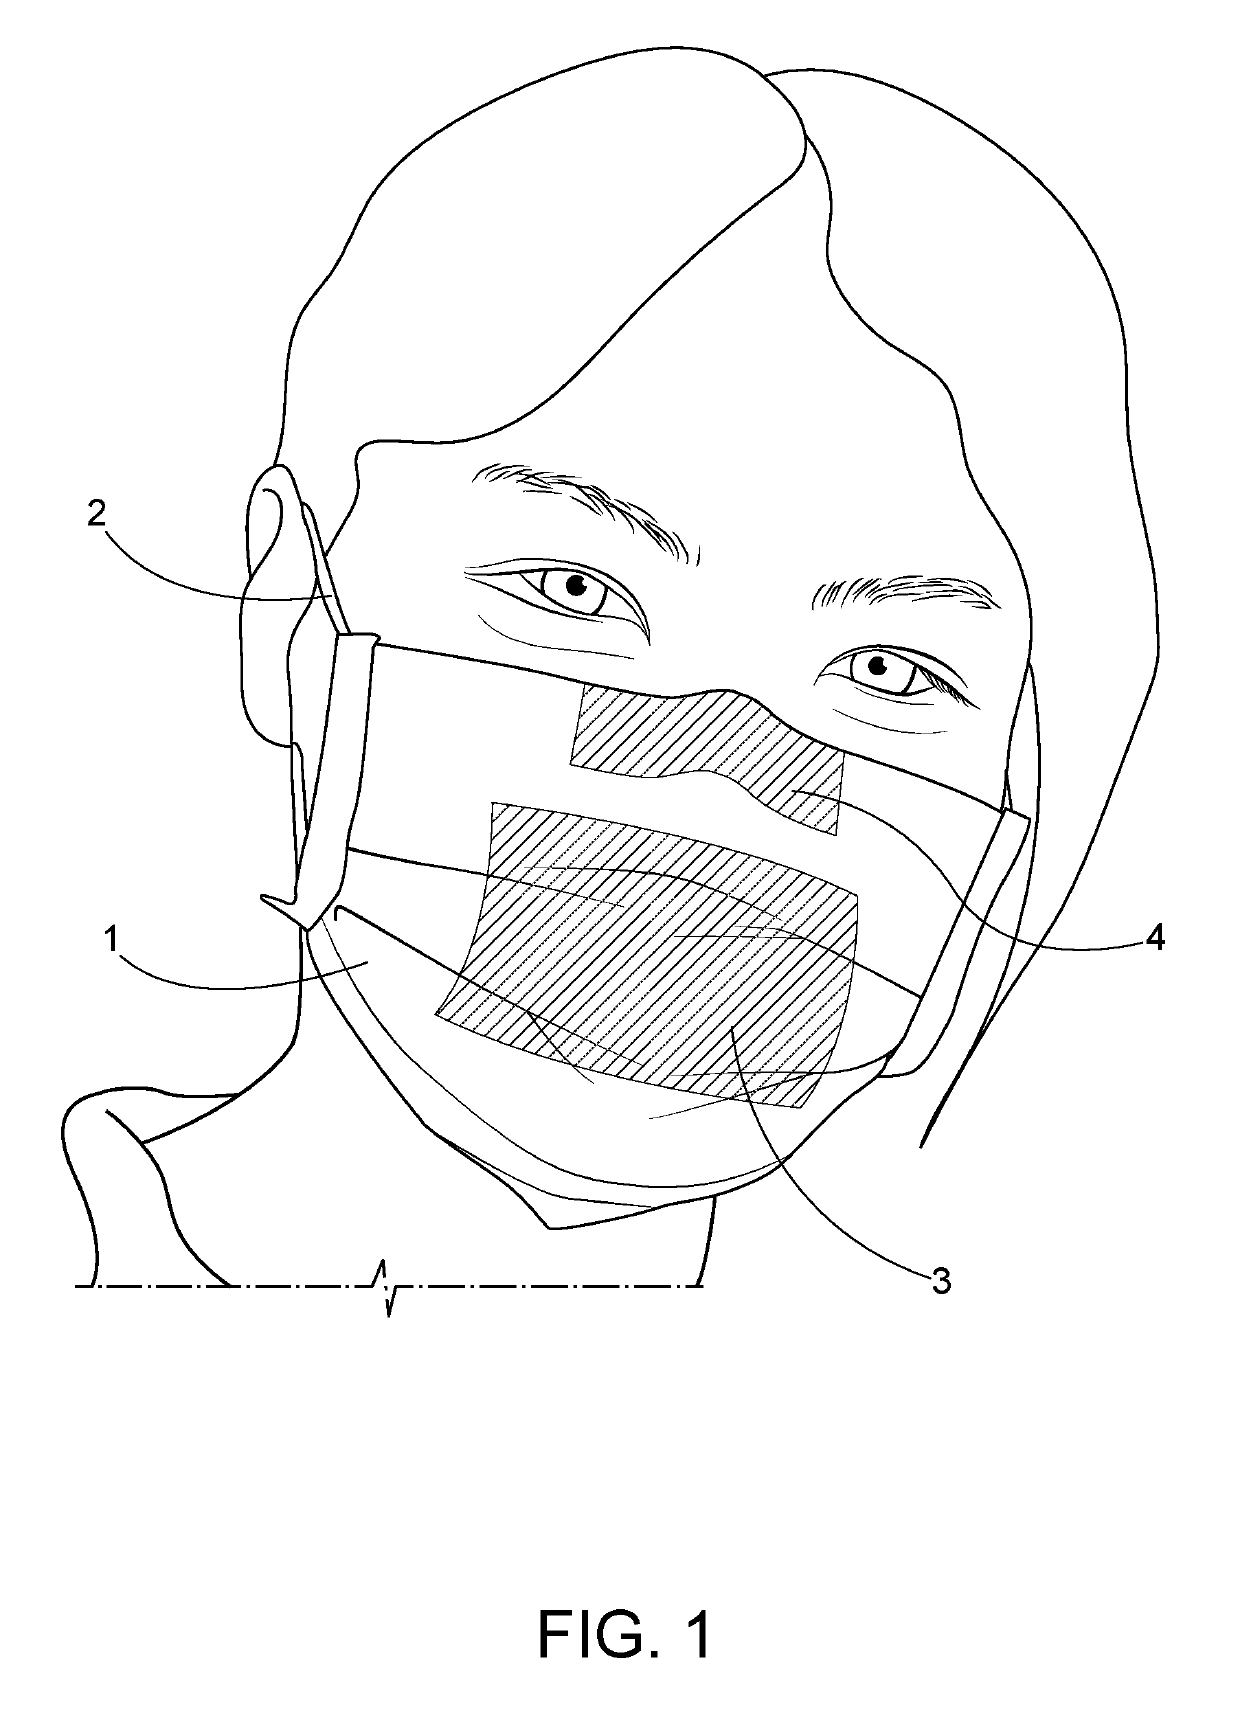 Temperature sensitive surgical face mask for identifying at risk patients and reducing viral infection